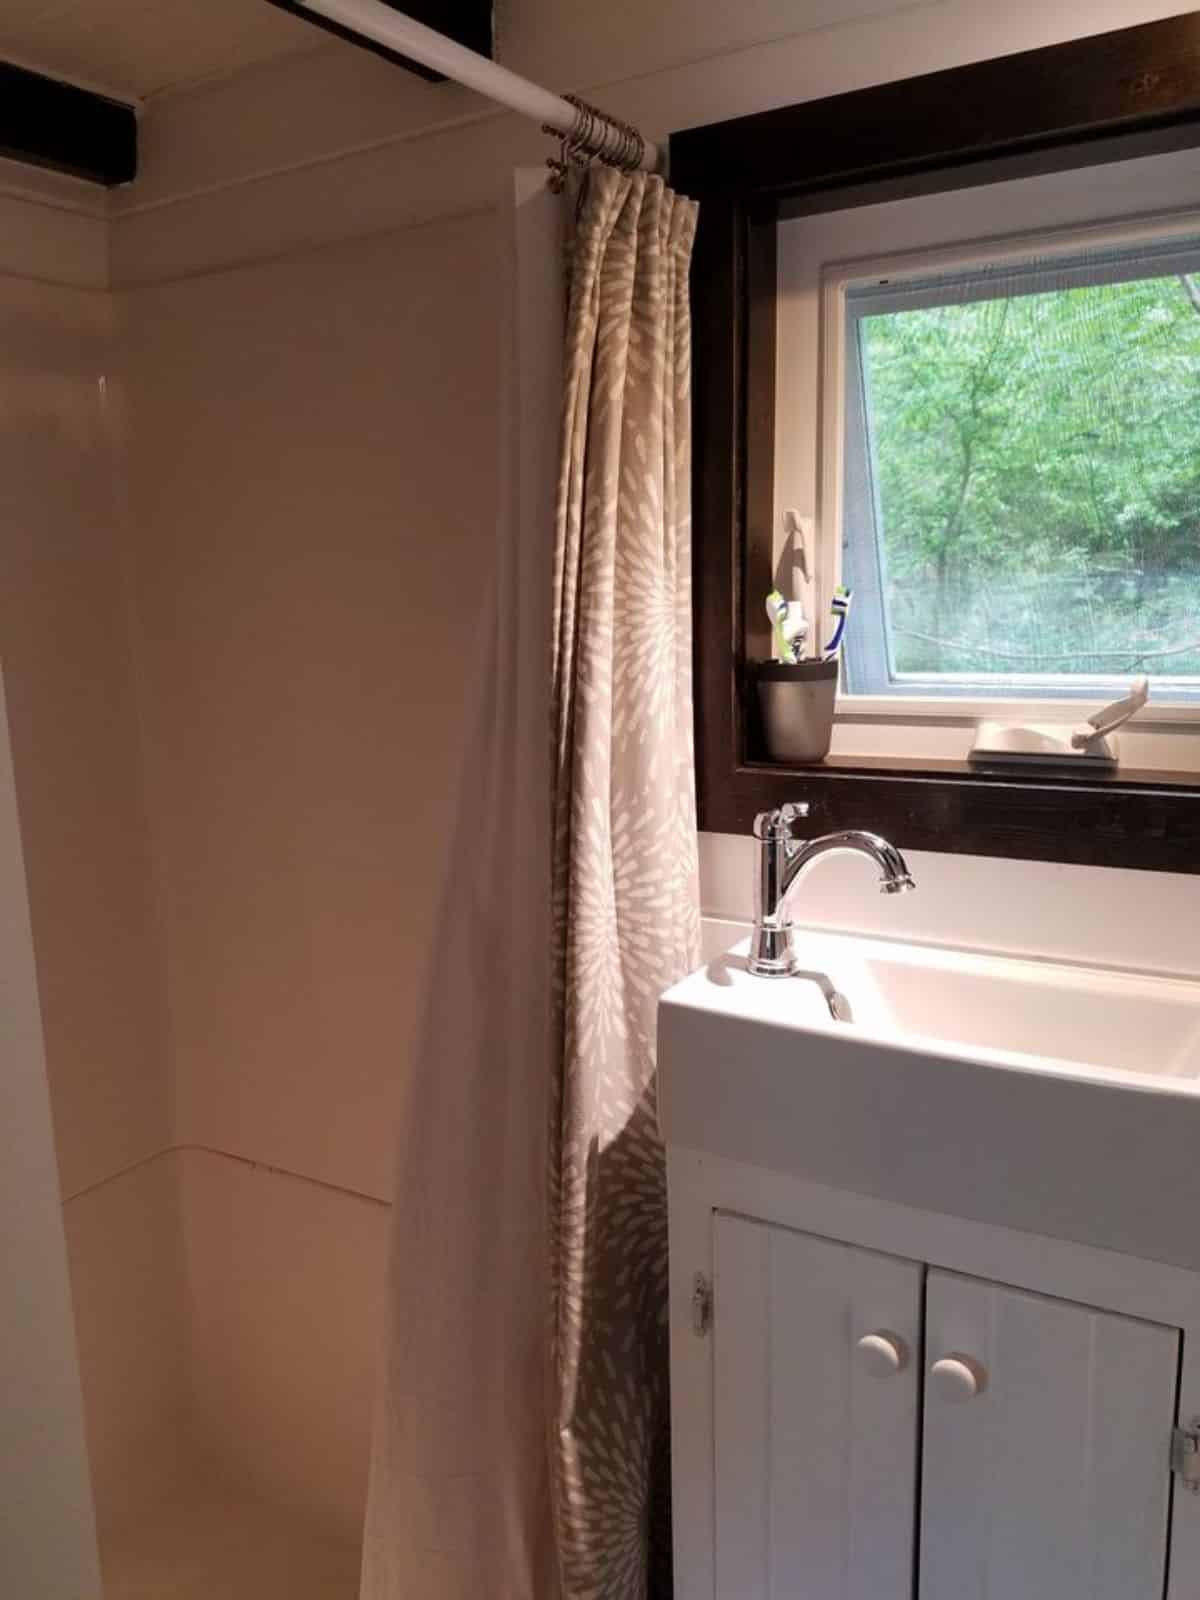 sink with vanity and separate shower area in bathroom